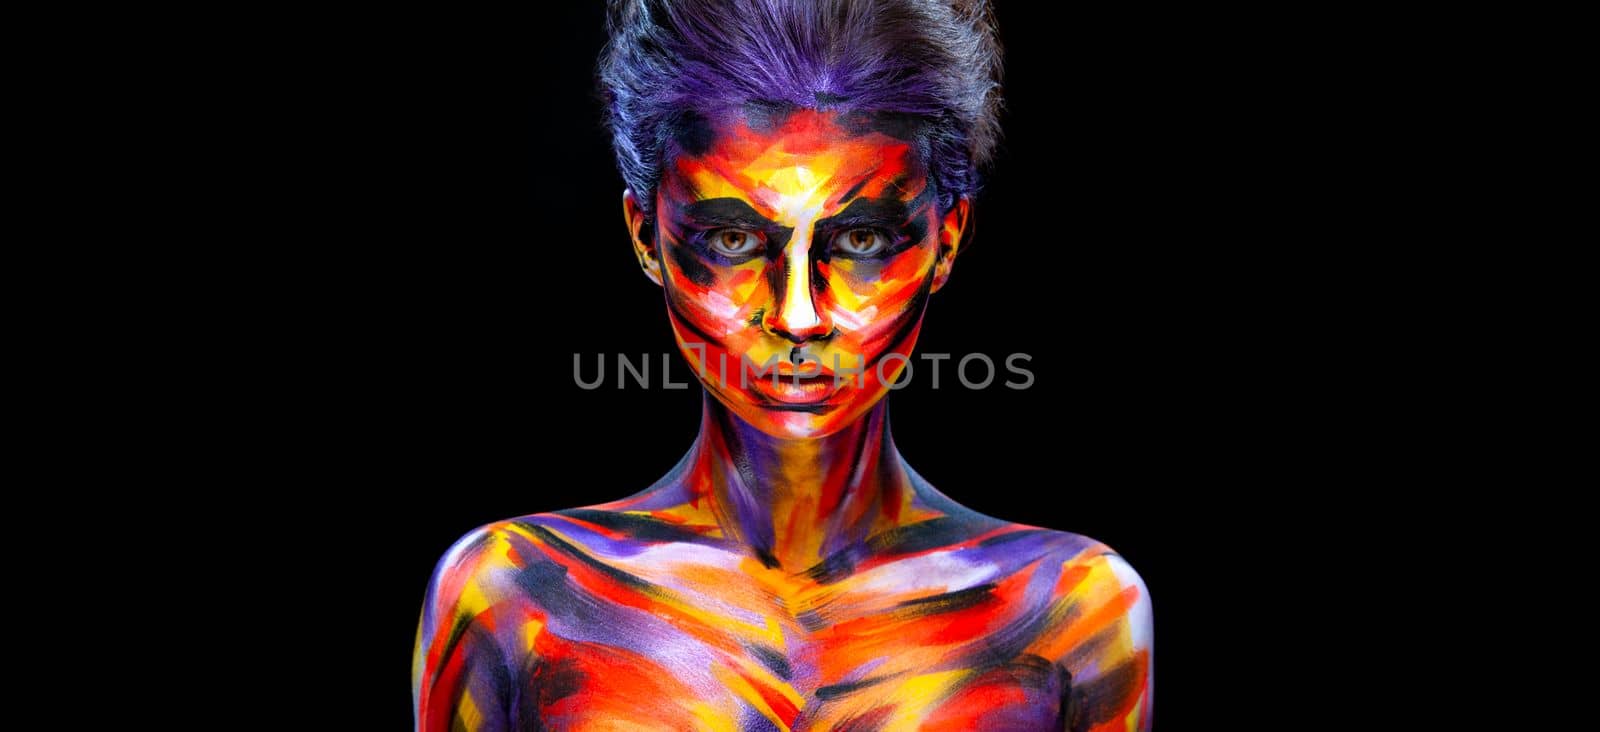 Download high quality photo for the cover of an audio CD or book. Portrait of the bright beautiful girl with art colorful make-up and bodyart by MikeOrlov